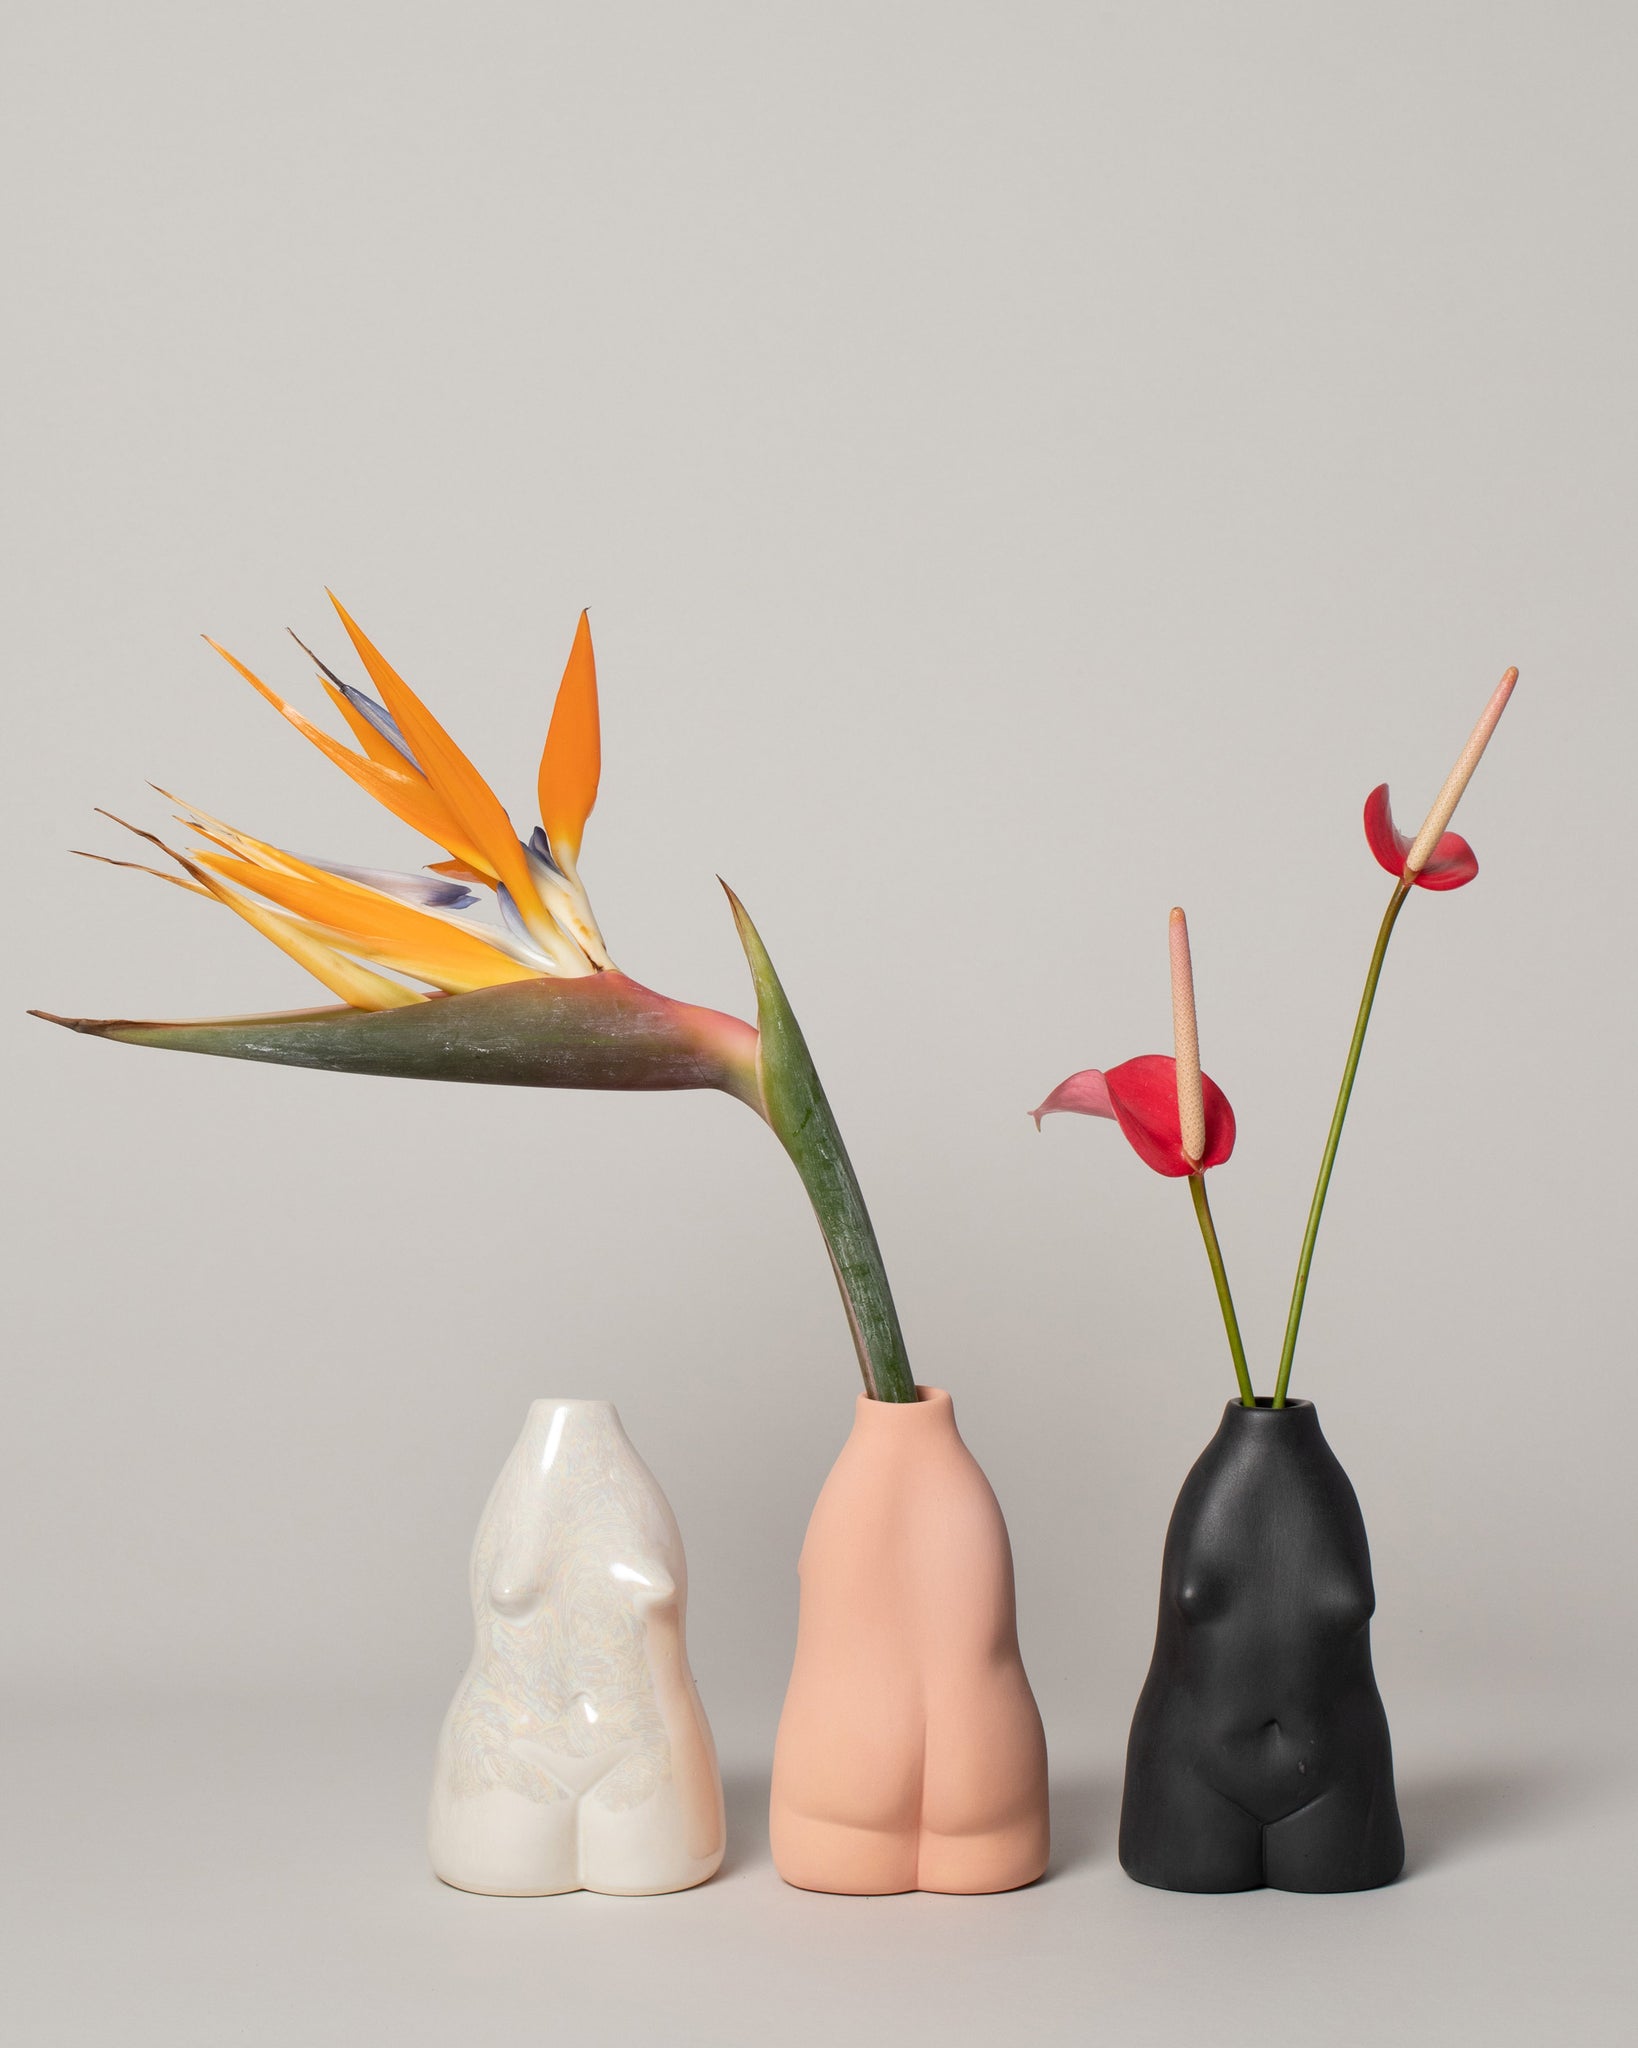 Rachel Saunders Collection Woman vases in white, peach and black  with orange and red florals, on a neutral-light background.